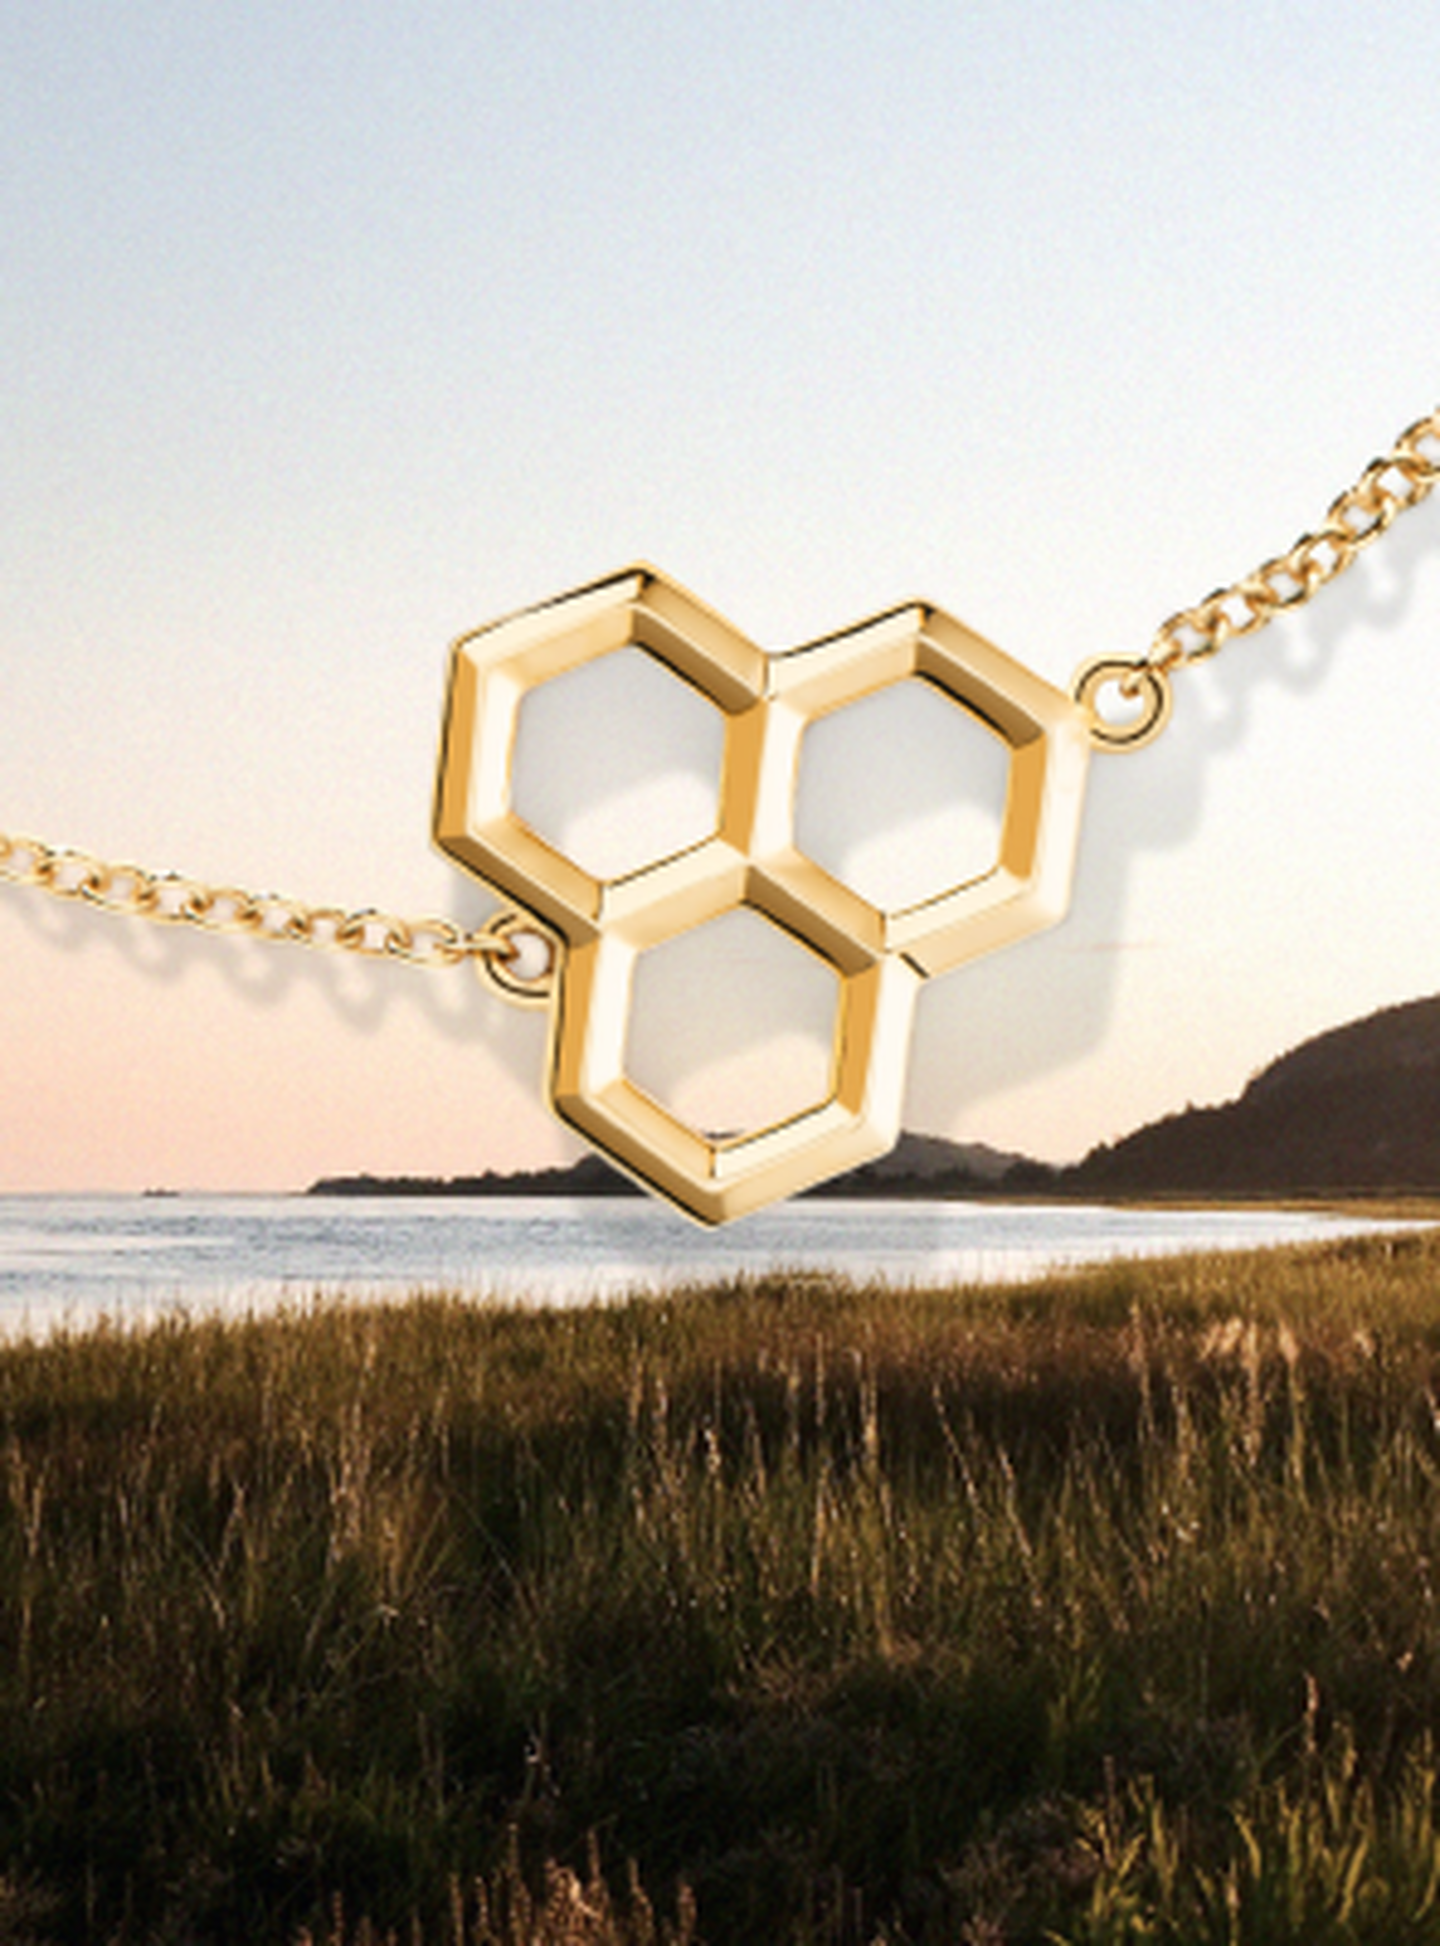 Birks Bee Chic yellow gold necklace in a field background.